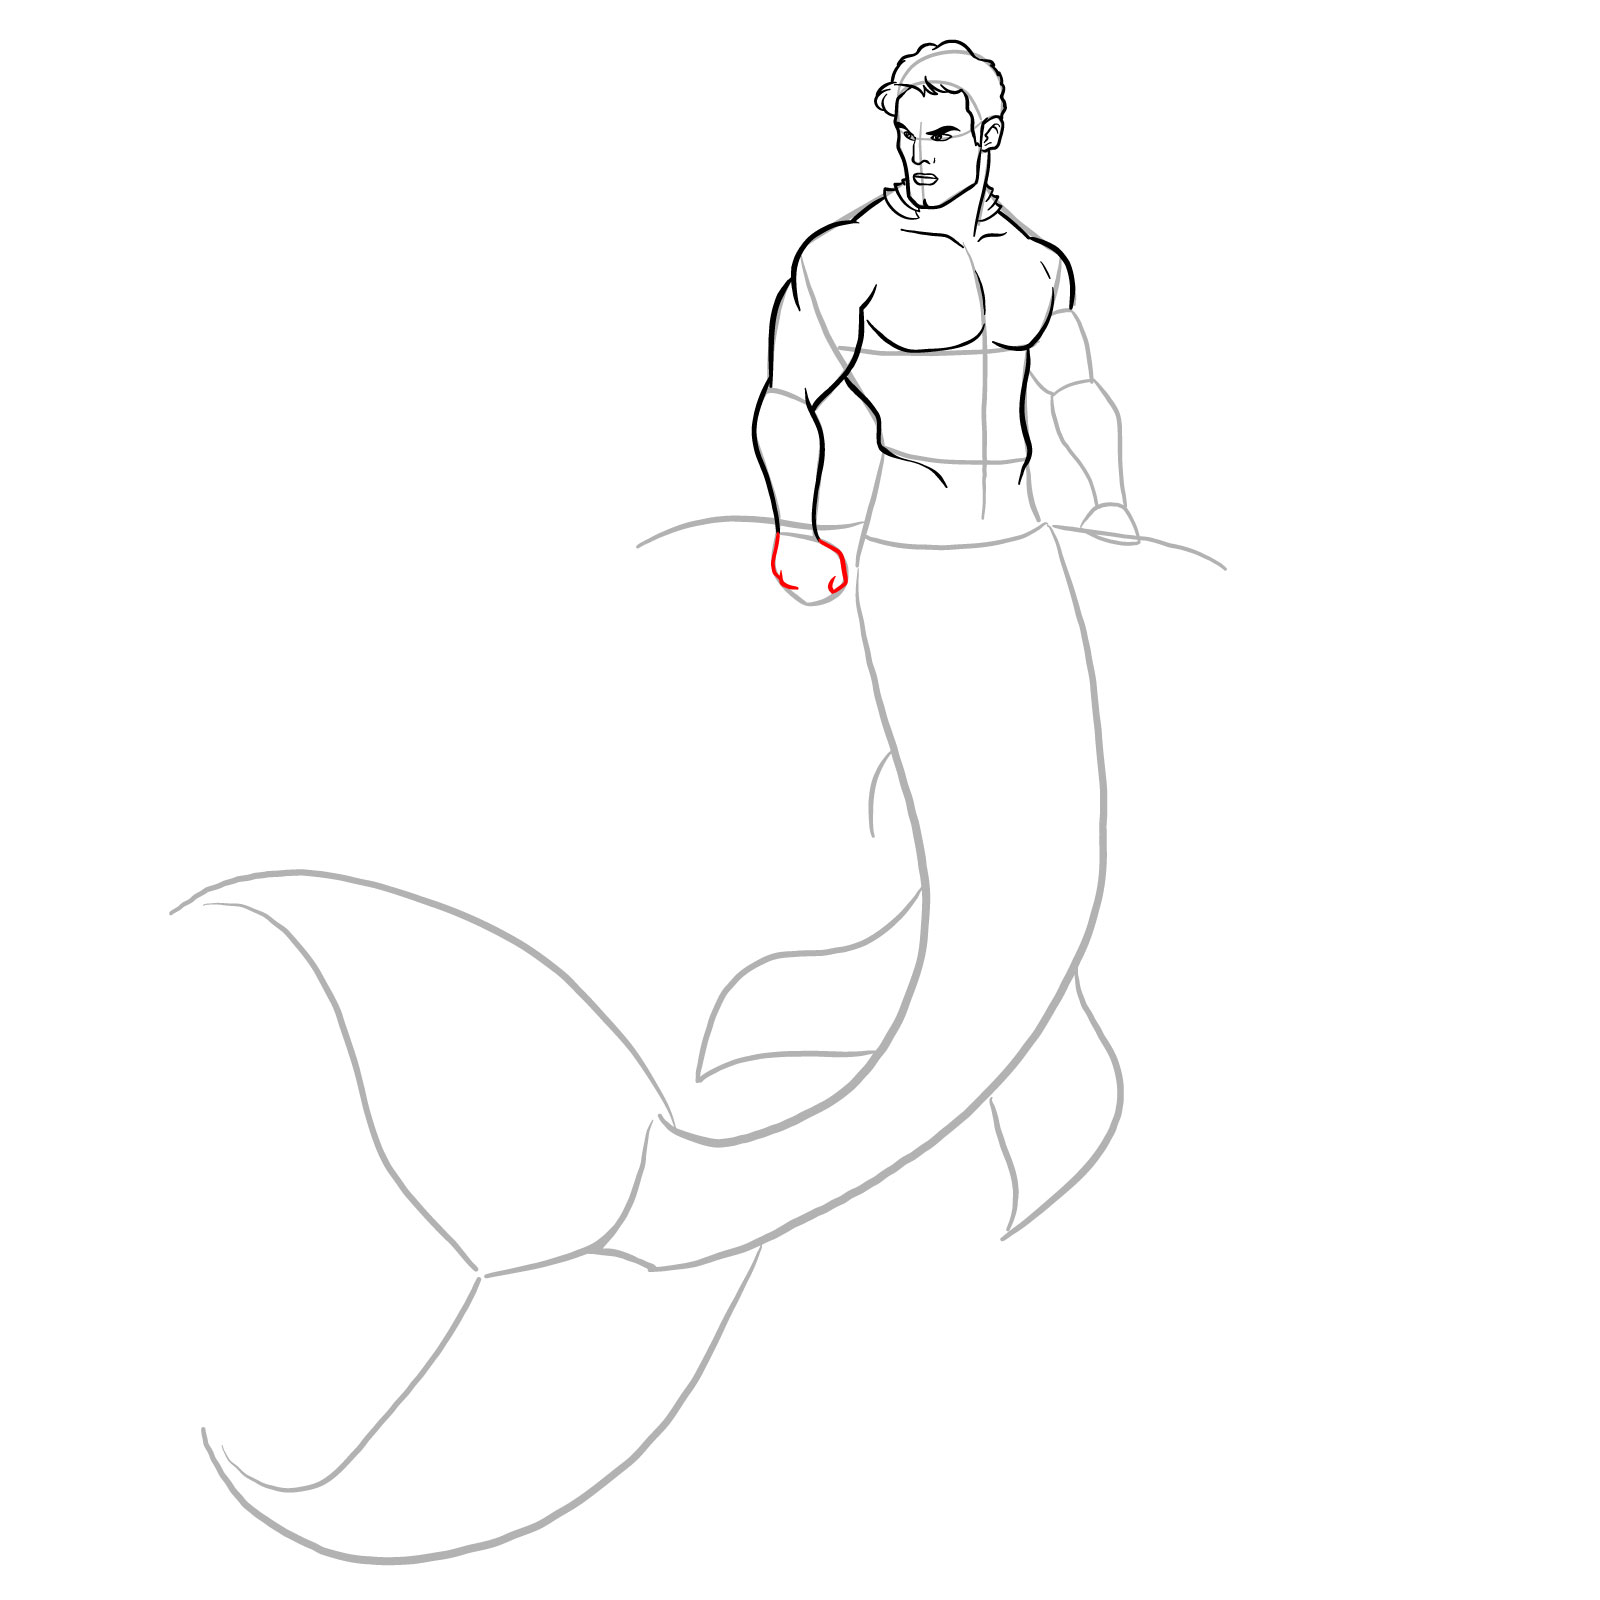 How to draw a Merman - step 17